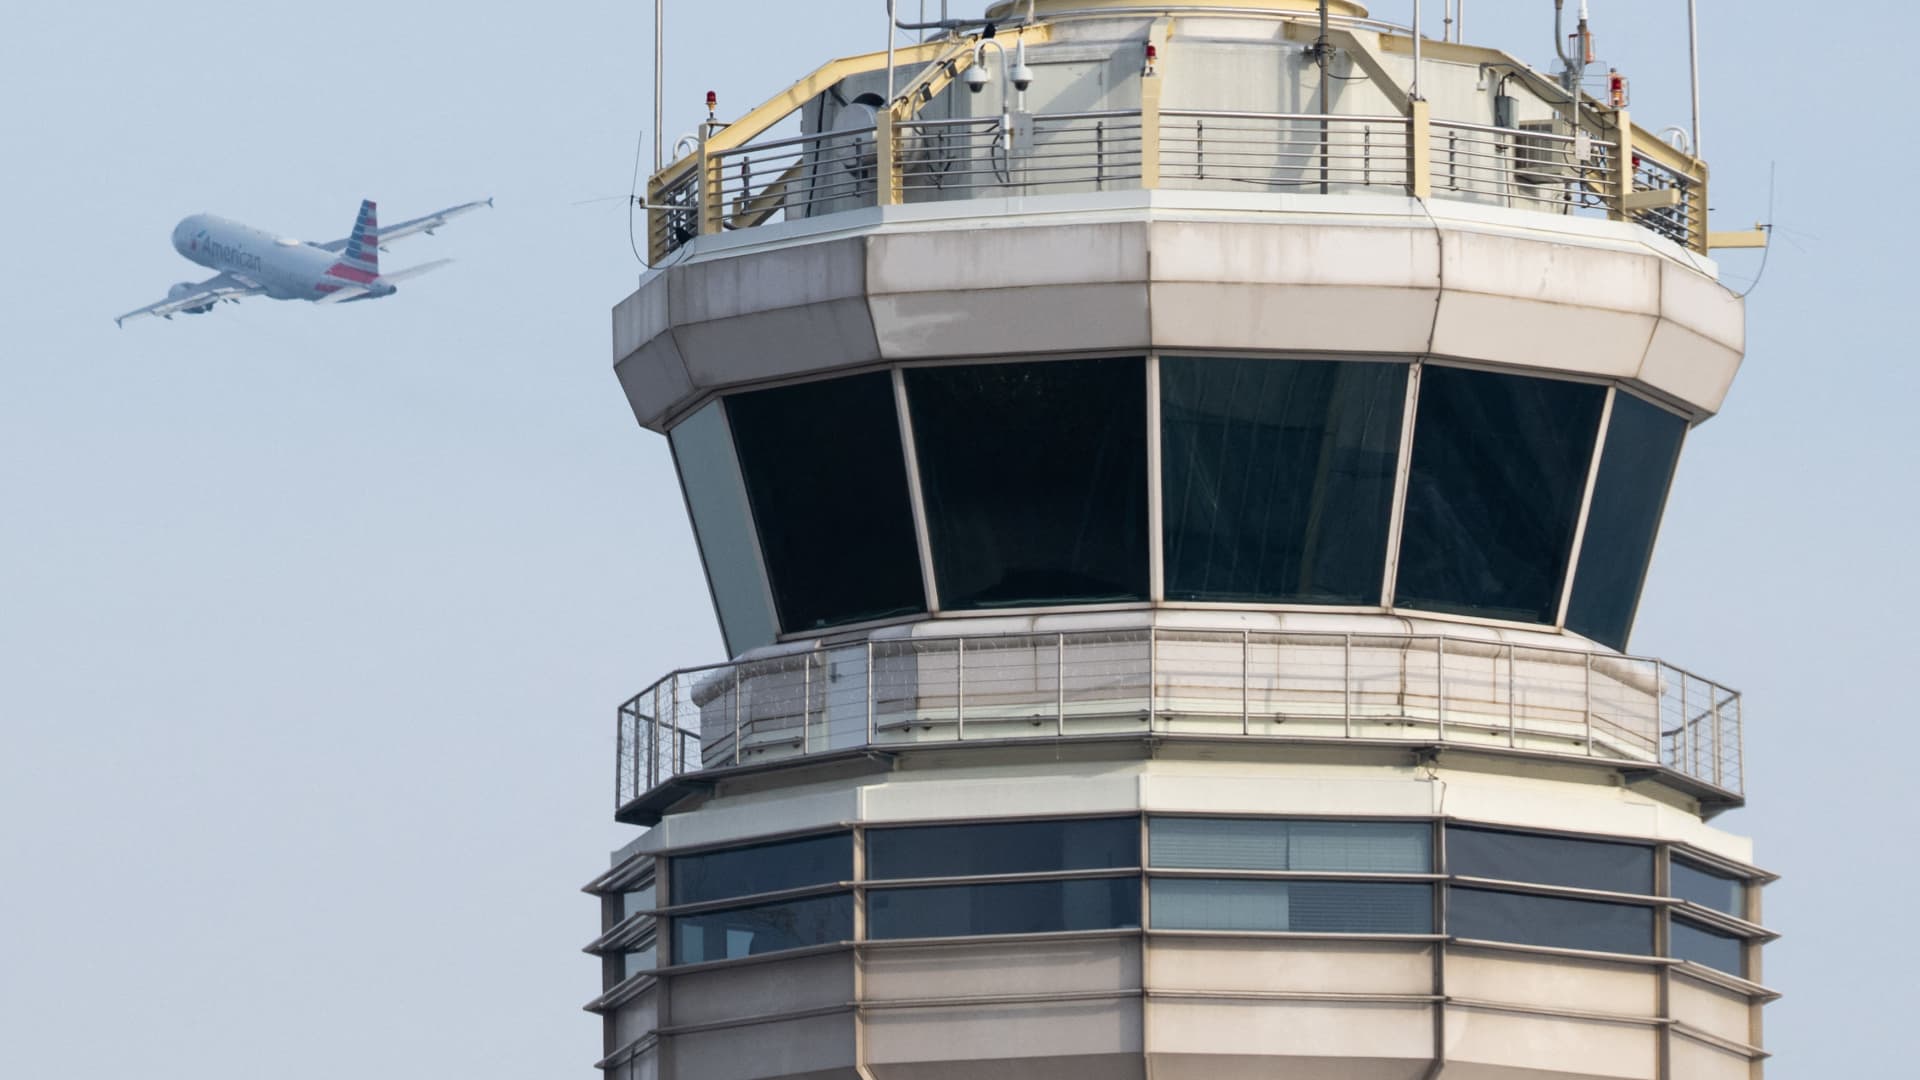 New FAA Rest Requirements for Air Traffic Controllers: 10 Hours Off Between Shifts and 12 Hours Before Midnight Shift